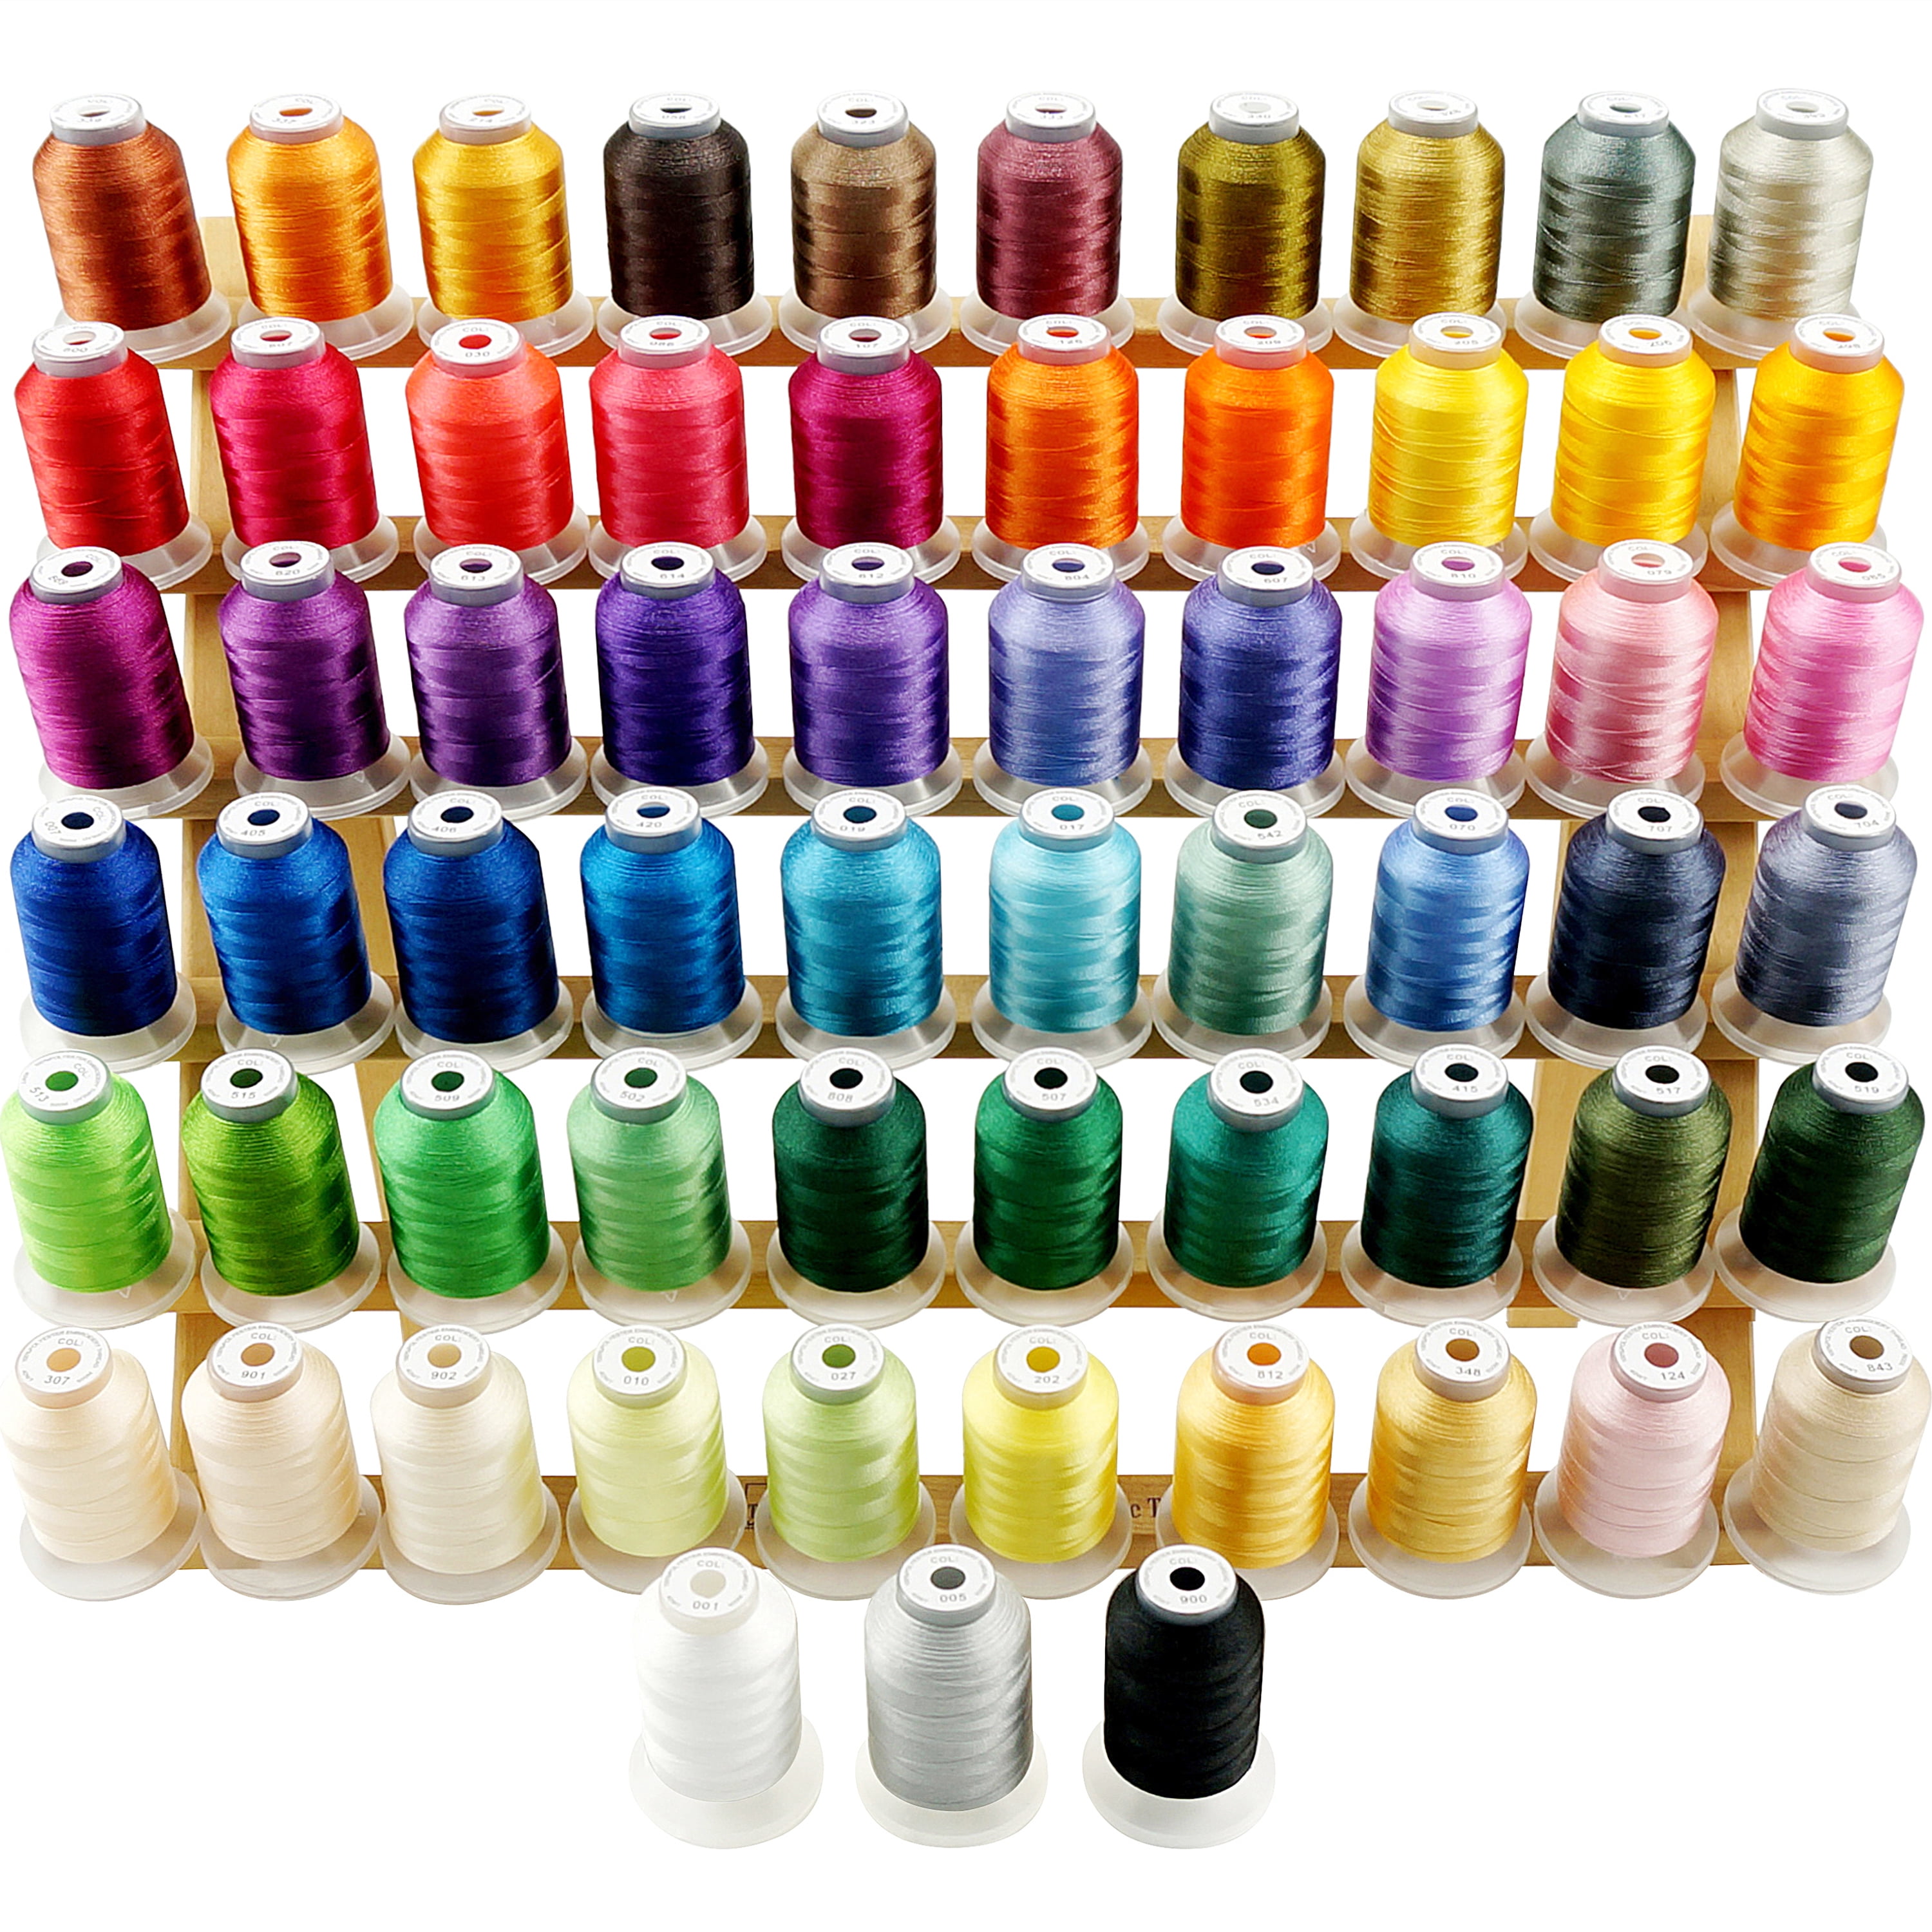 New Brothread 12 Colors Variegated Polyester Embroidery Machine Thread Kit  500M